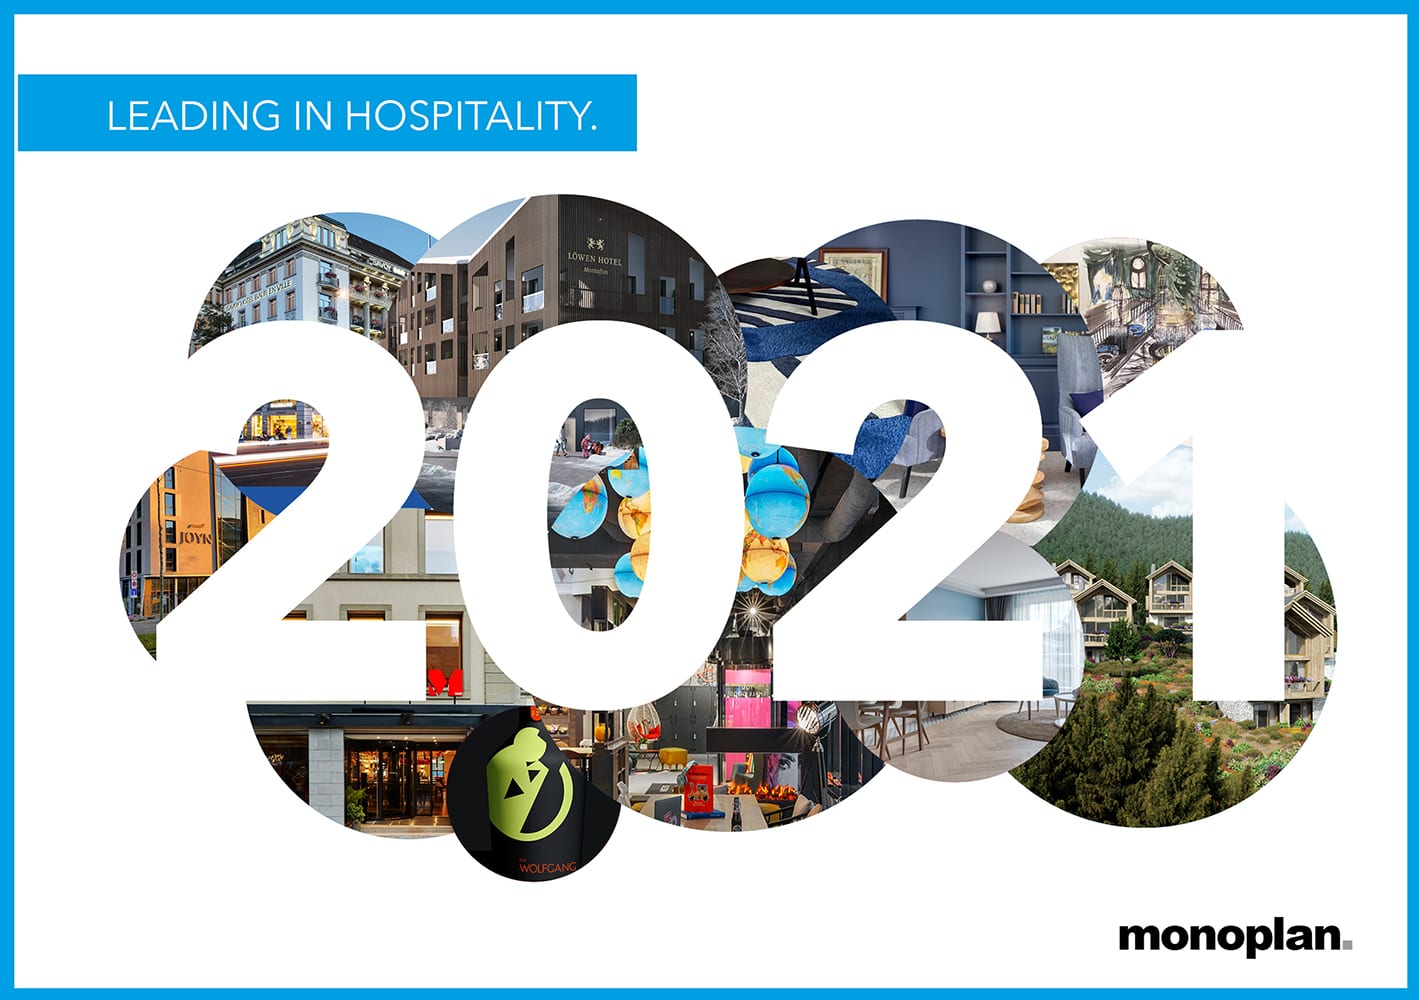 Leading in hospitality 2021